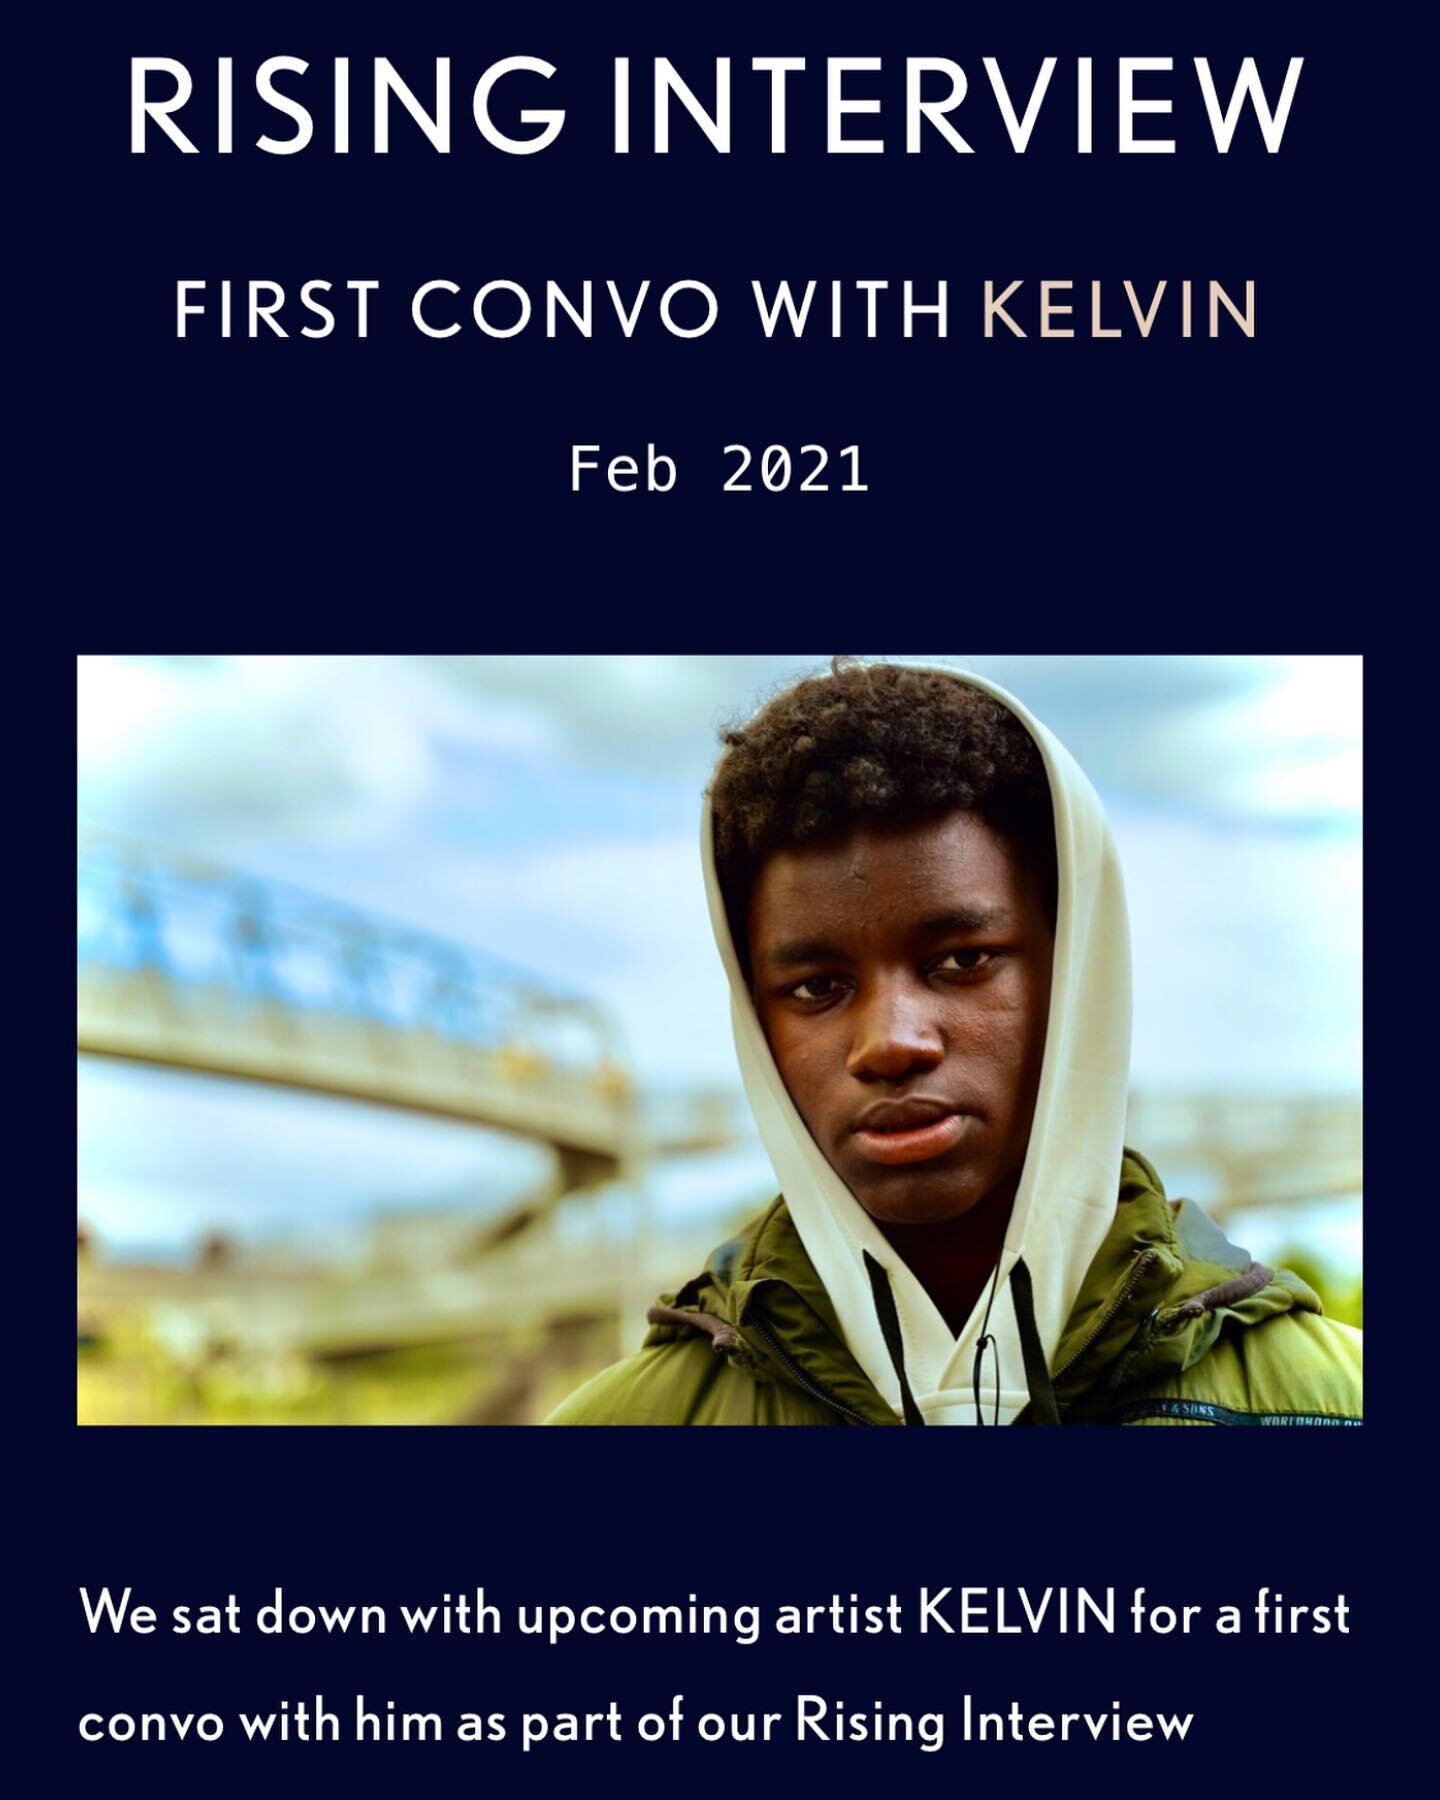 Our first ever RISING Interview | First Convo with Kelvin, - now available via our website 🗞
Talented rising artist @kelvin.og1 discusses lockdown, his writing process and what it was like moving to the UK. #interview #risingartist #kingdomldn